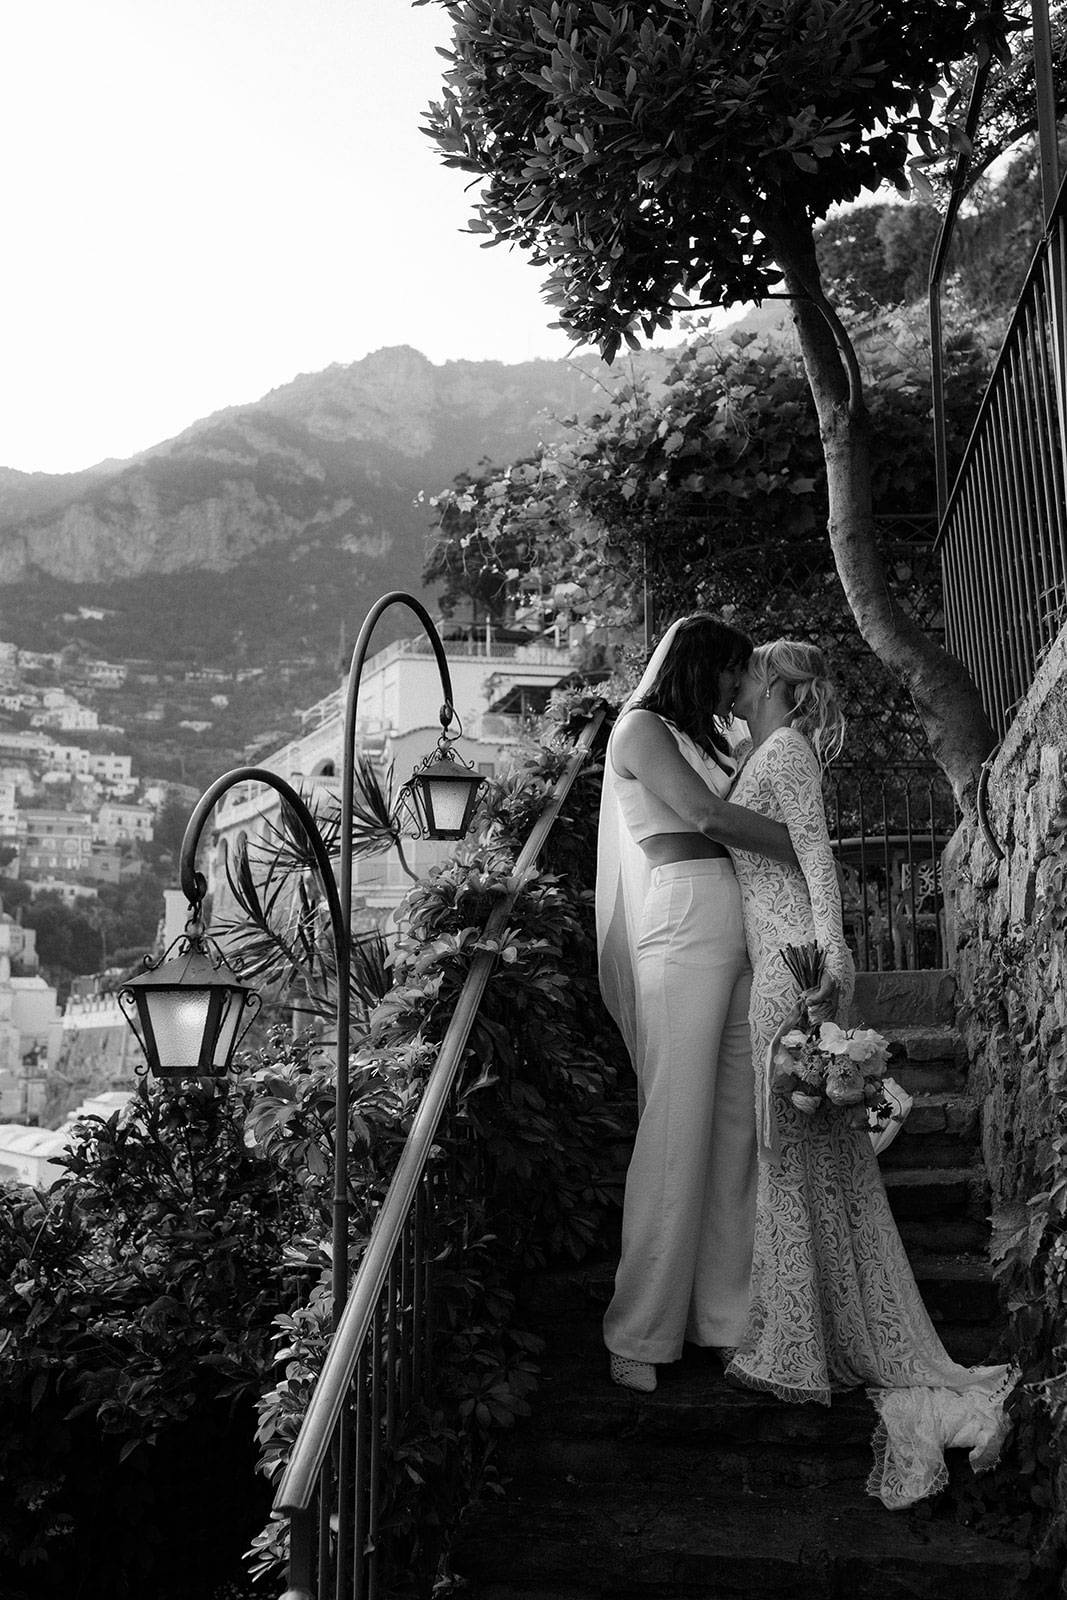 Brides sharing a kiss on an old, concrete staircase